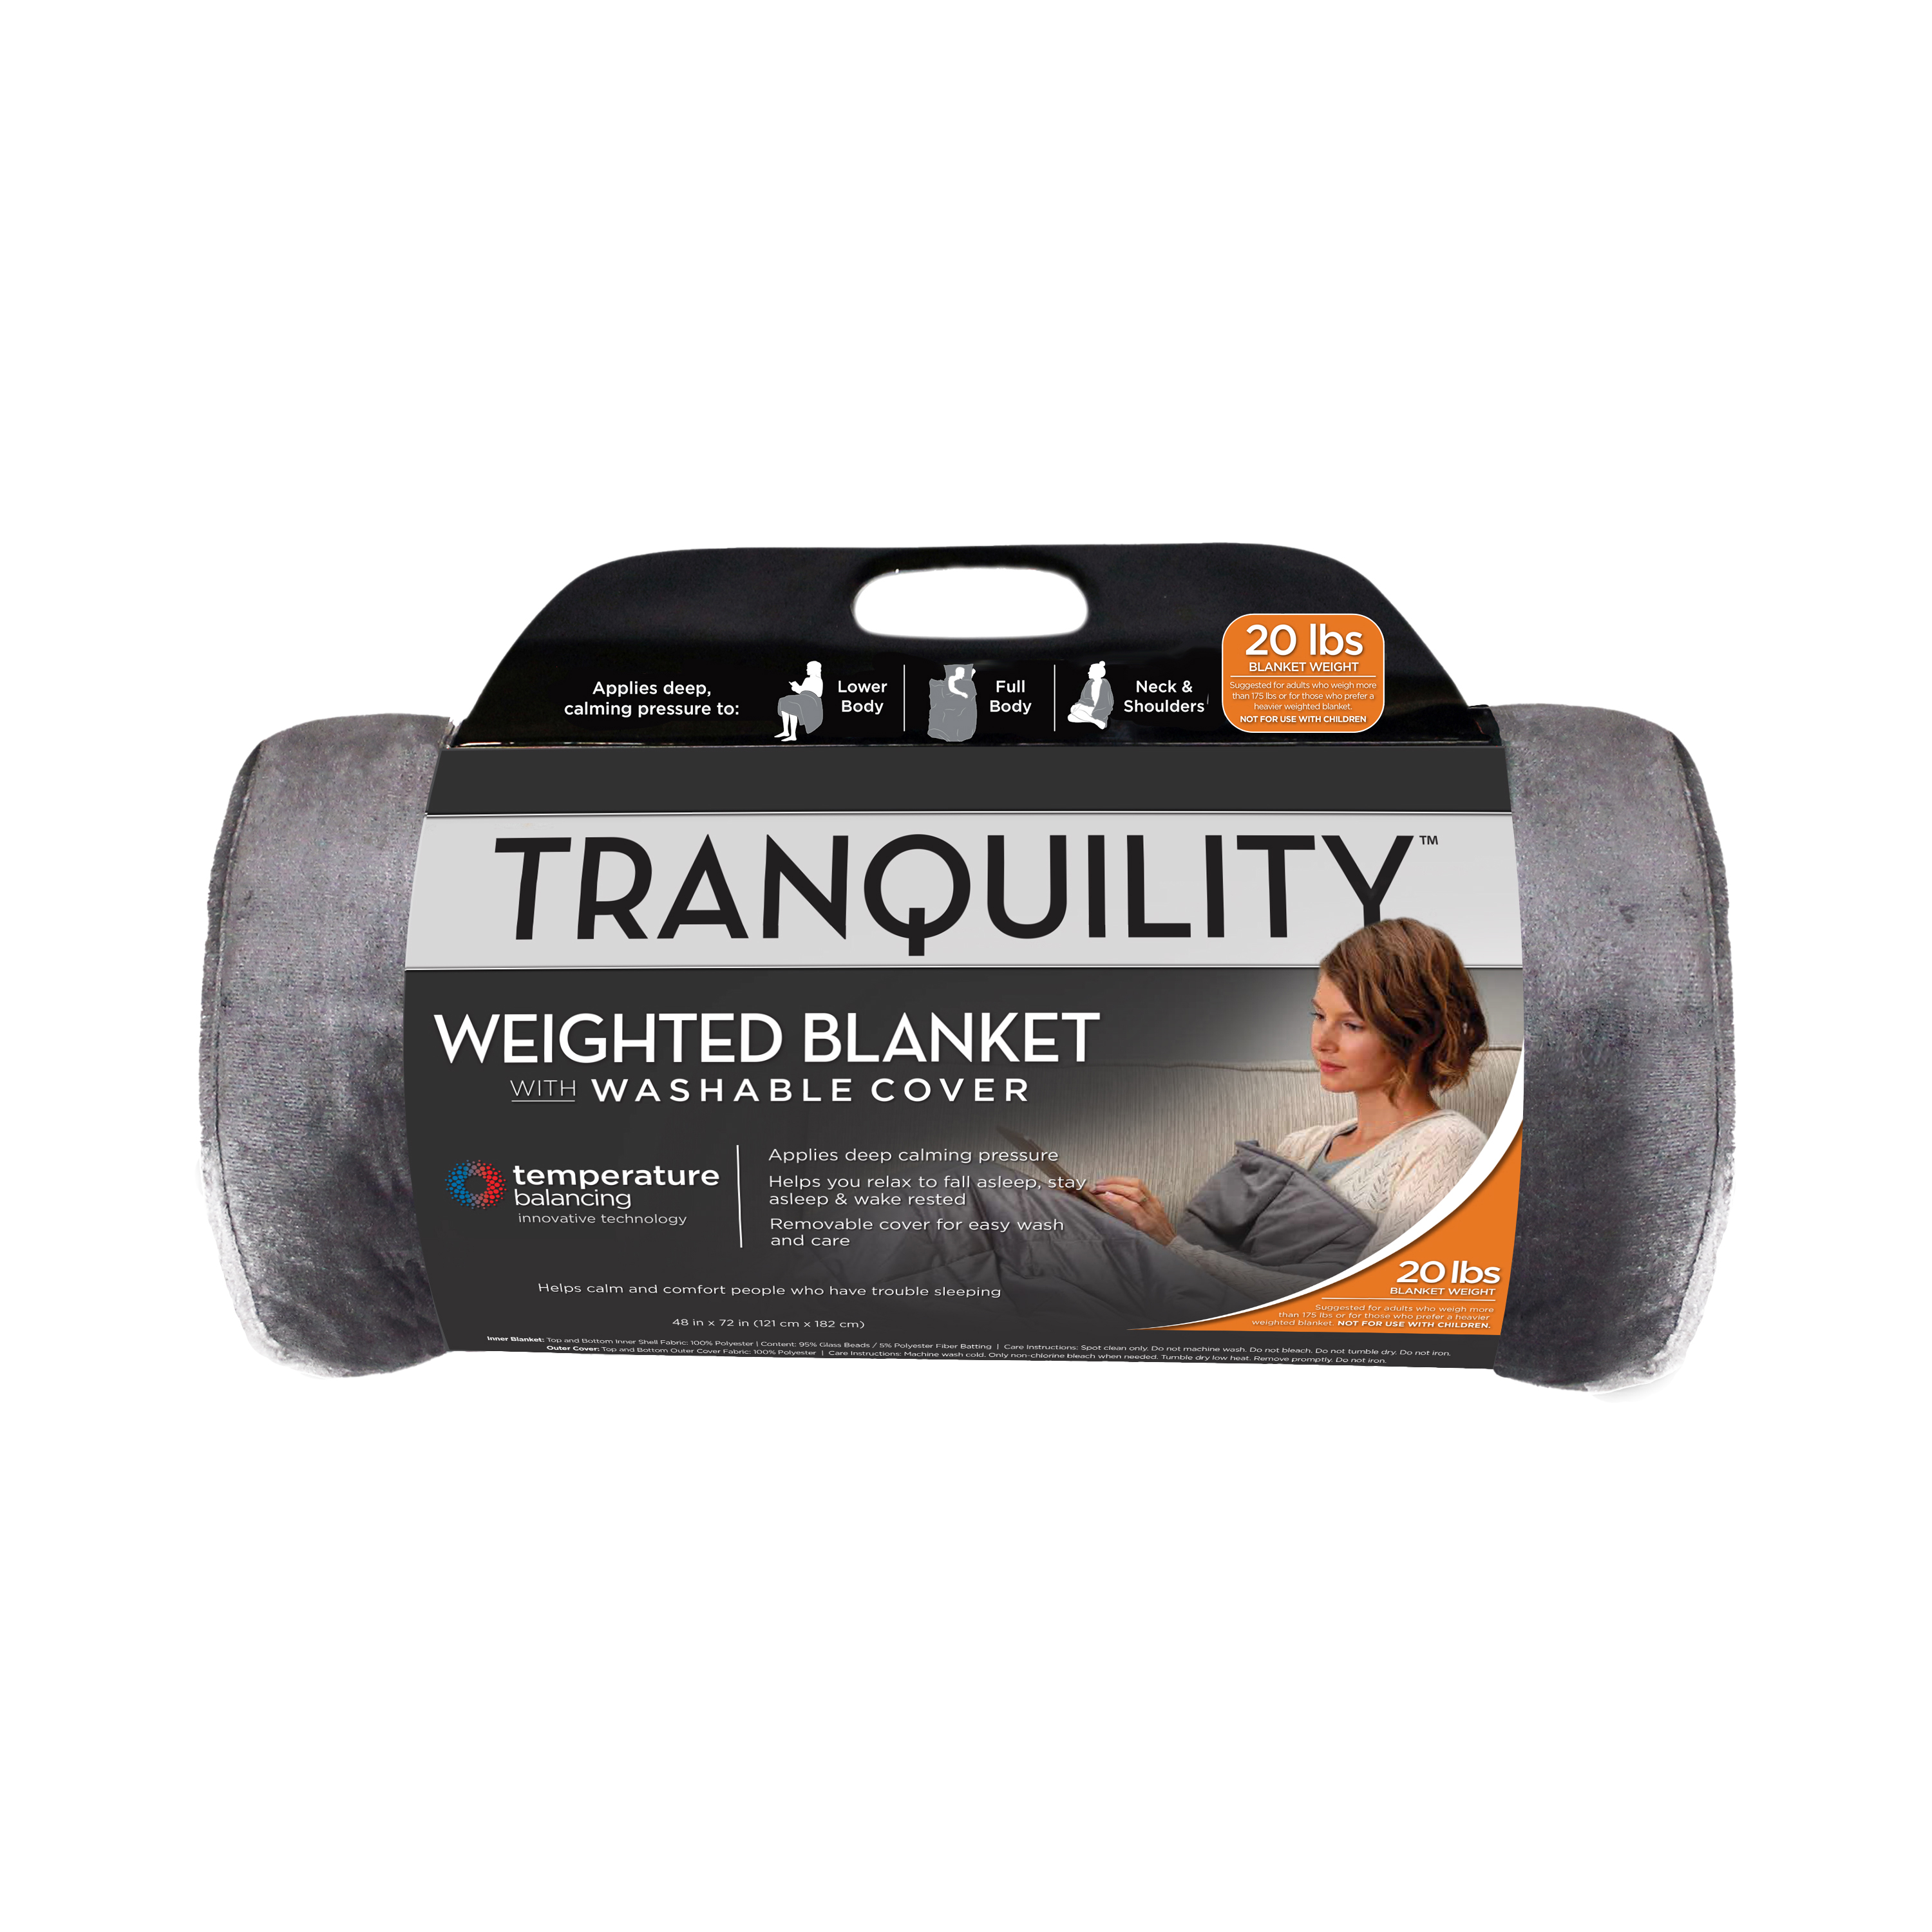 Tranquility Temperature Balancing Weighted Blanket with Washable Cover, 20 lbs - image 1 of 9